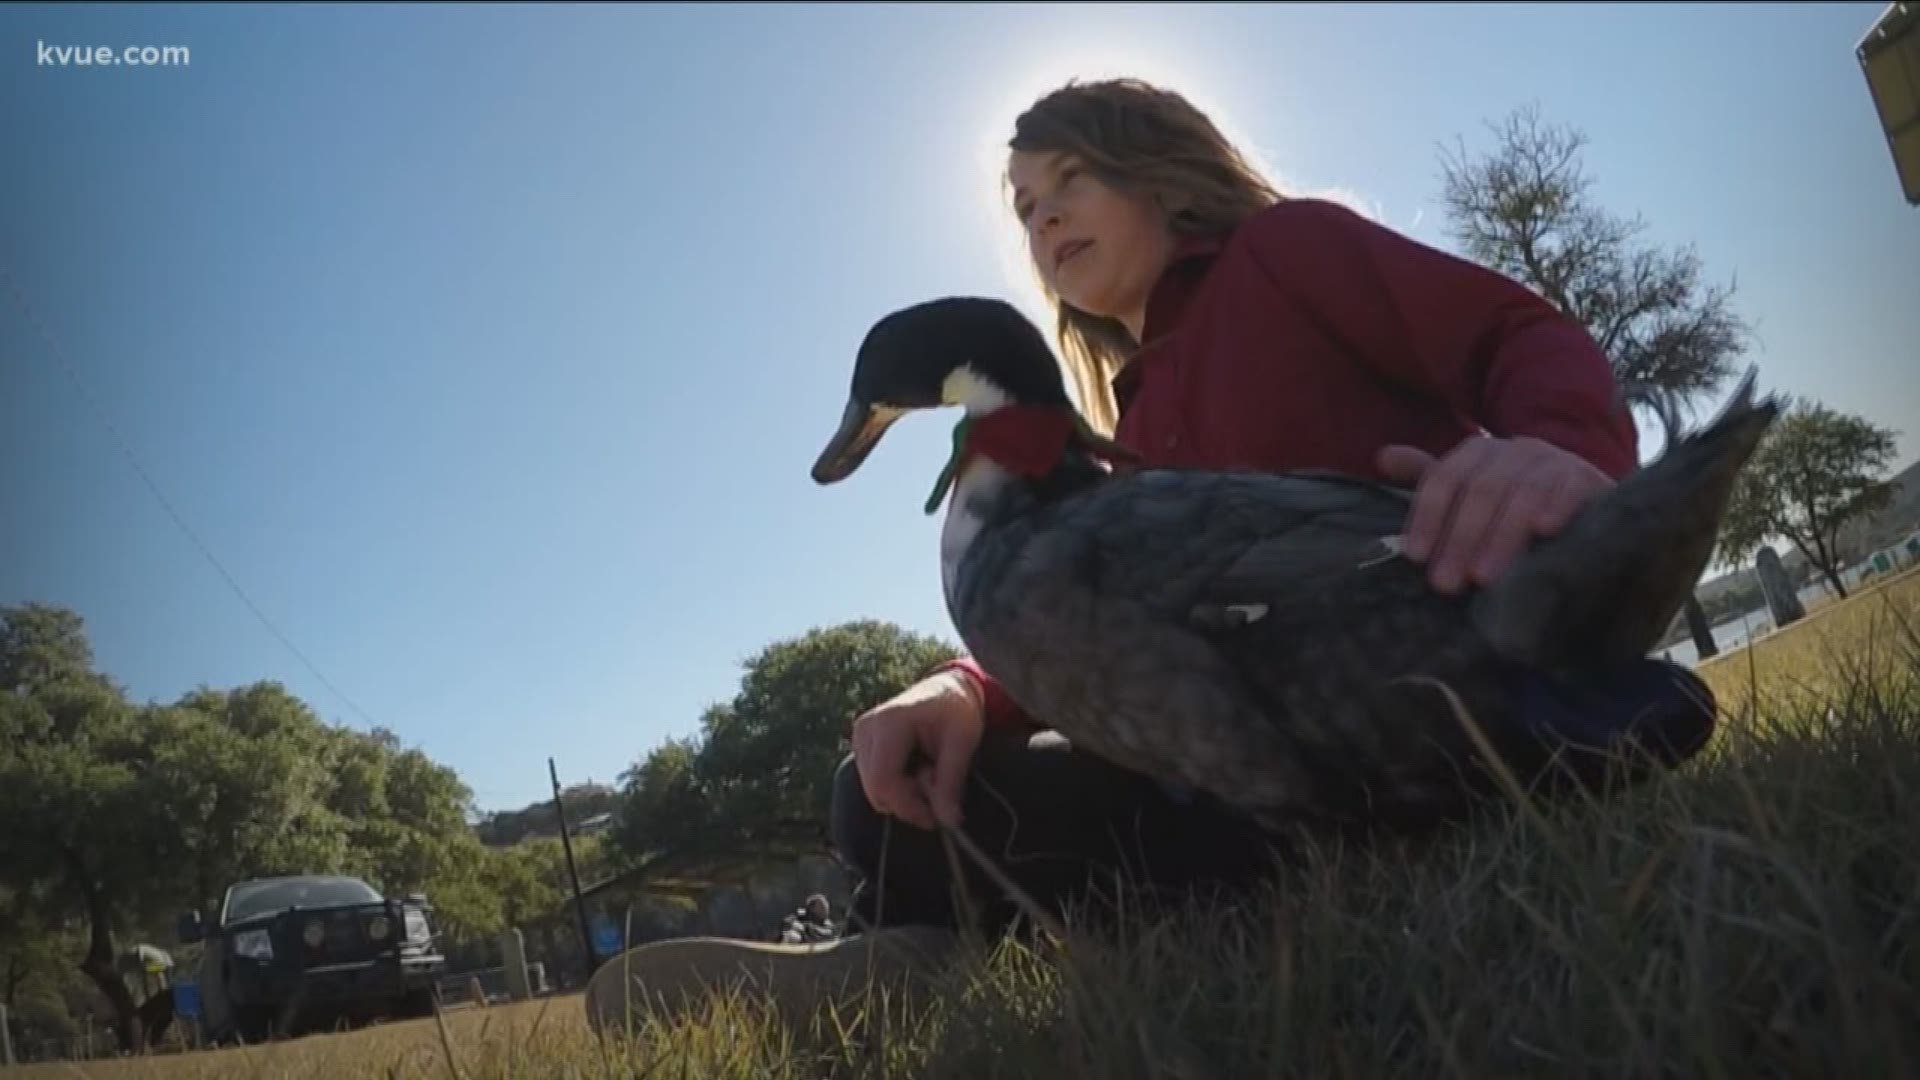 For one Austin girl, her emotional support duck helps her cope with a daily emotional struggle.